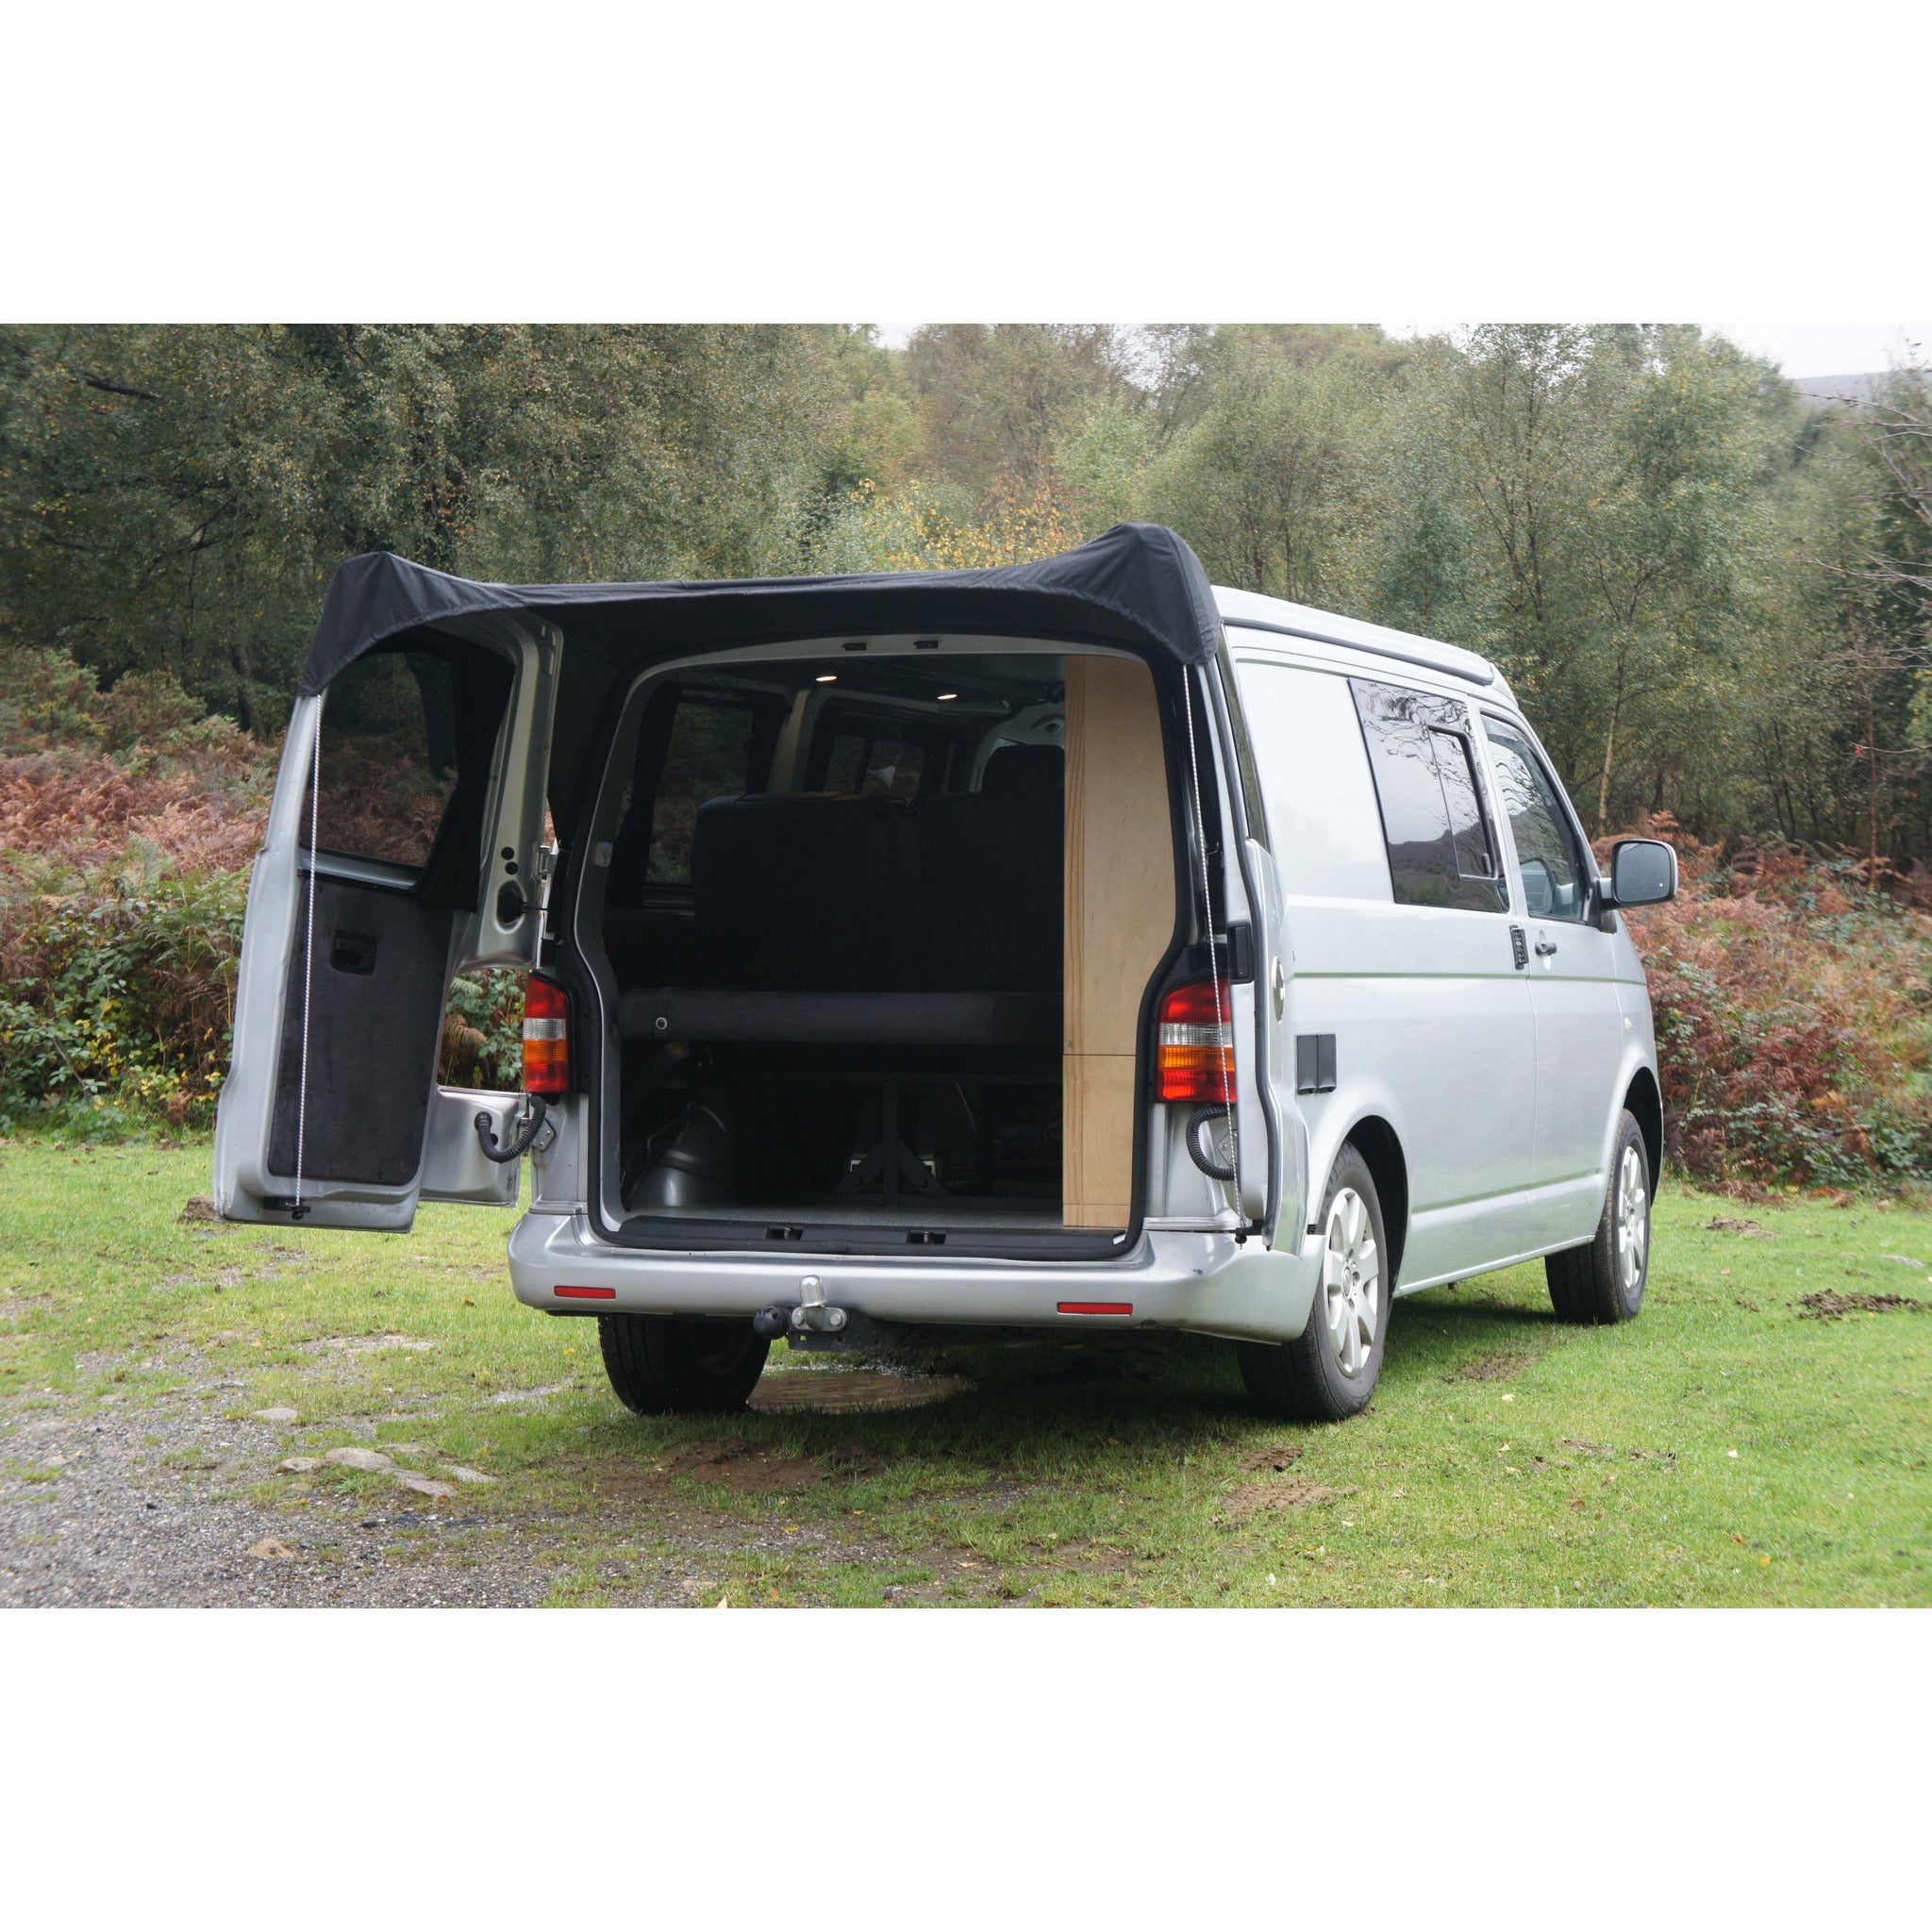 No Tailgate? No problem Barn Door Campervan Awning for VW T4